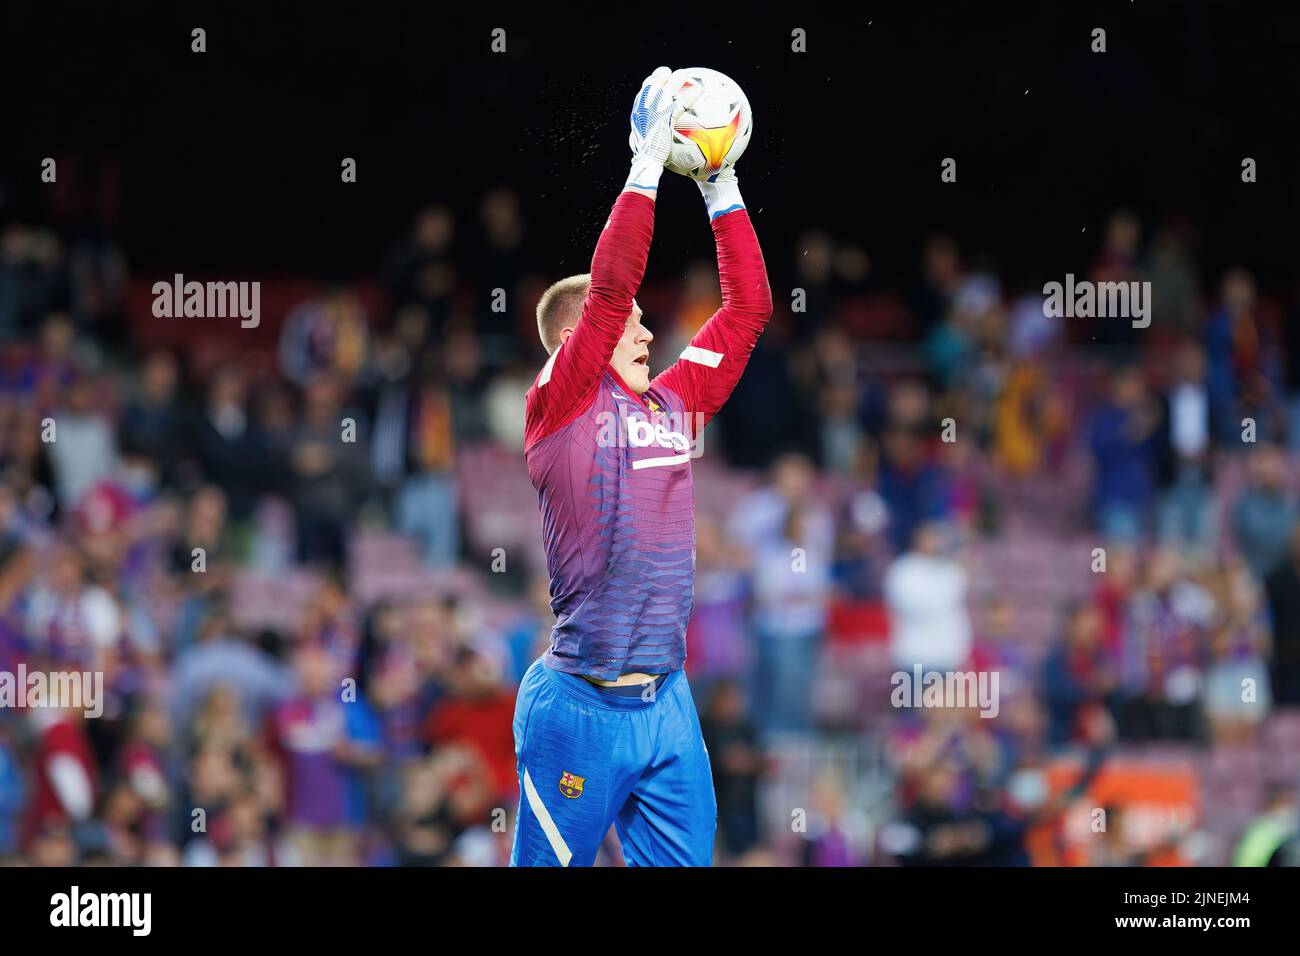 BARCELONA - MAY 1: Ter Stegen in action during the La Liga match between FC Barcelona and RCD Mallorca at the Camp Nou Stadium on May 1, 2022 in Barce Stock Photo